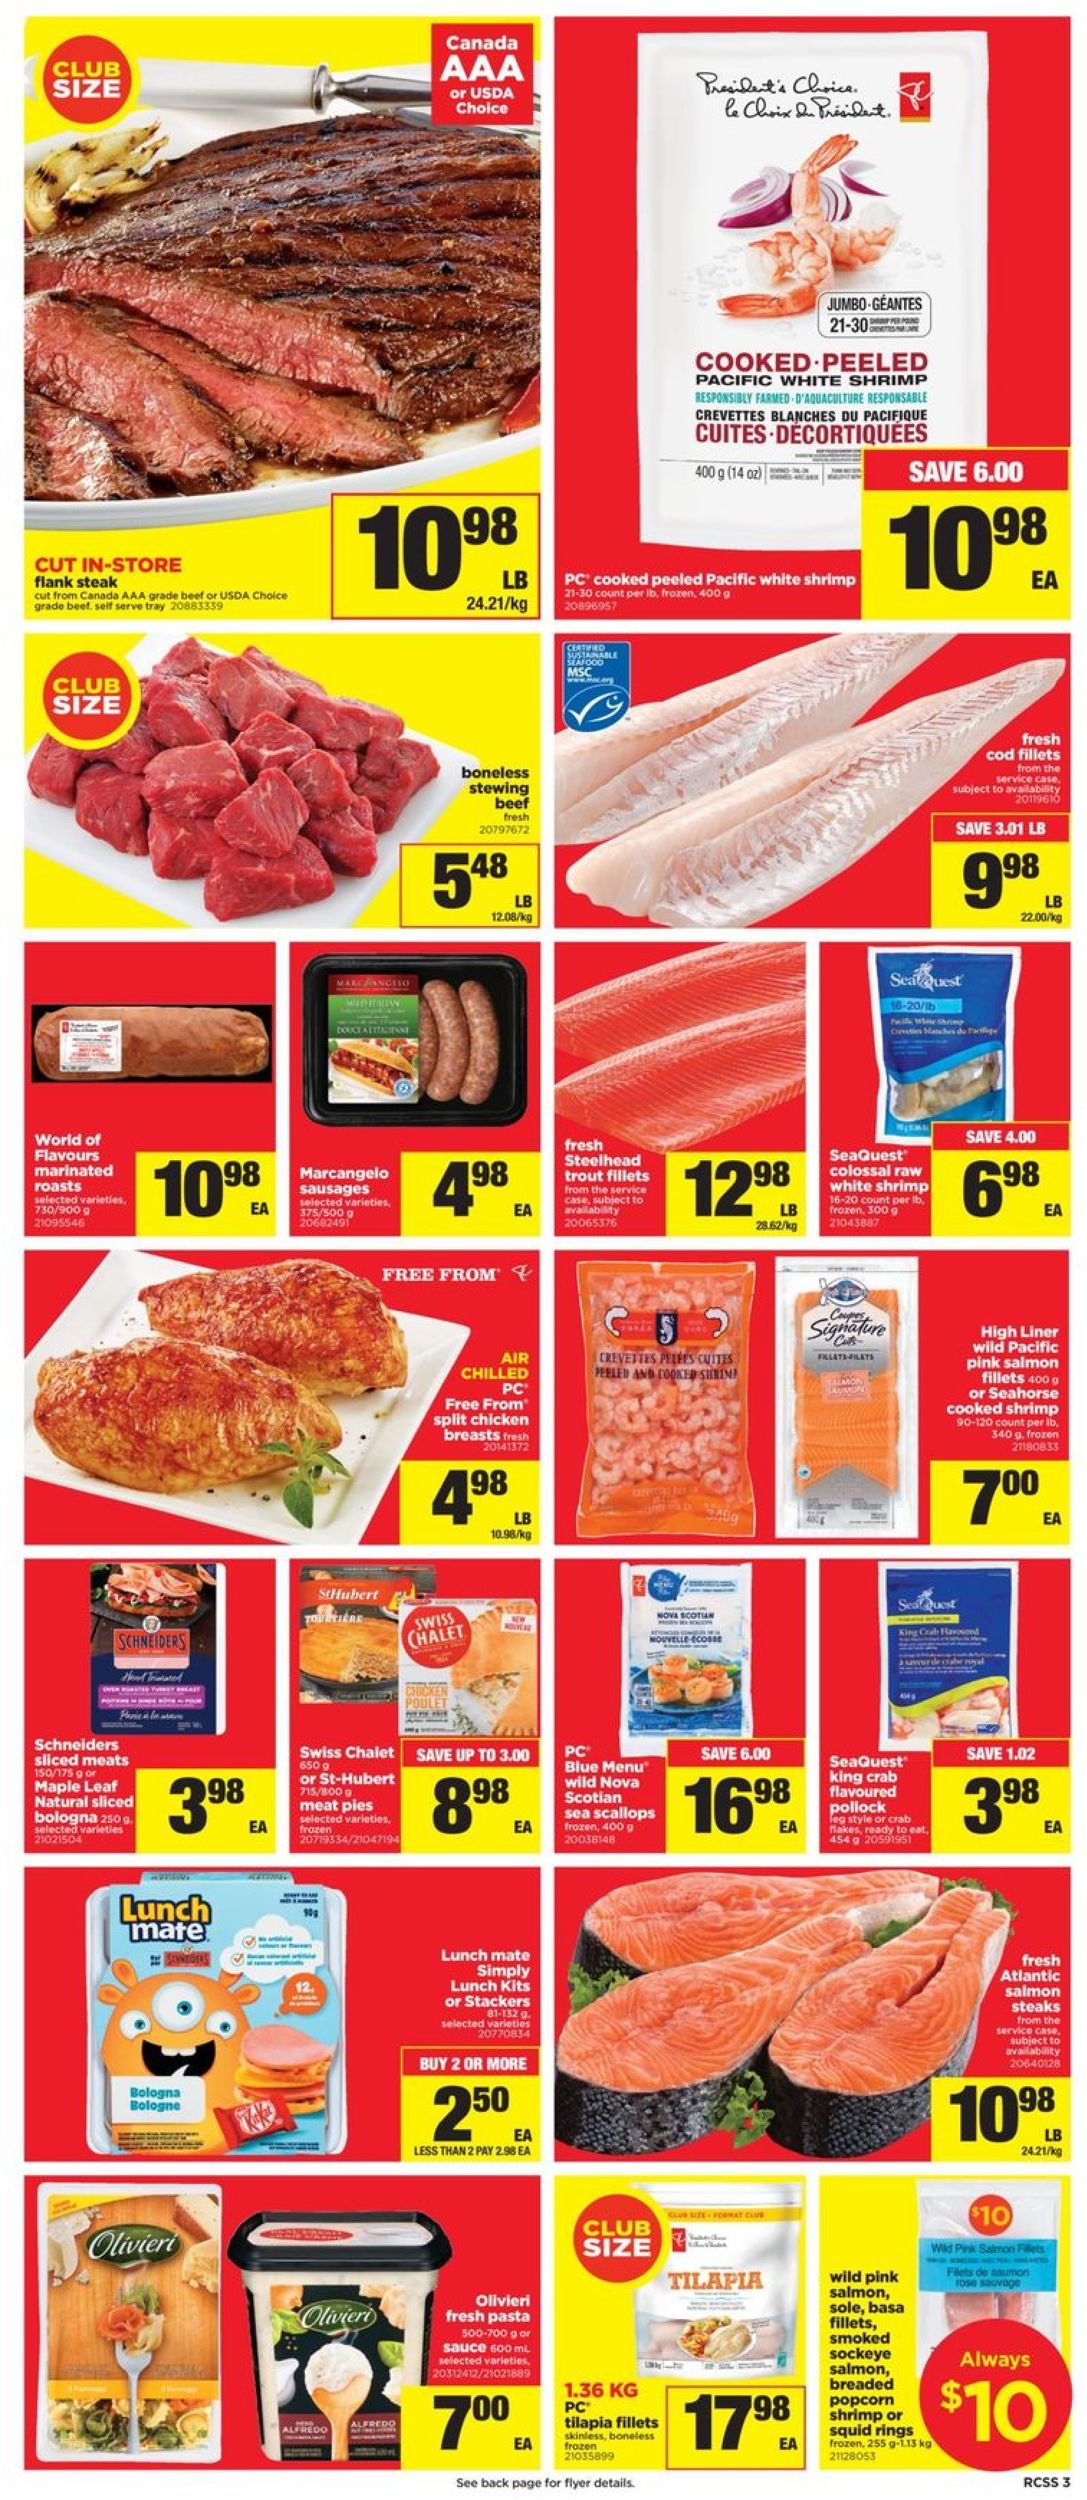 Real Canadian Superstore Flyer - 10/17-10/23/2019 (Page 3)